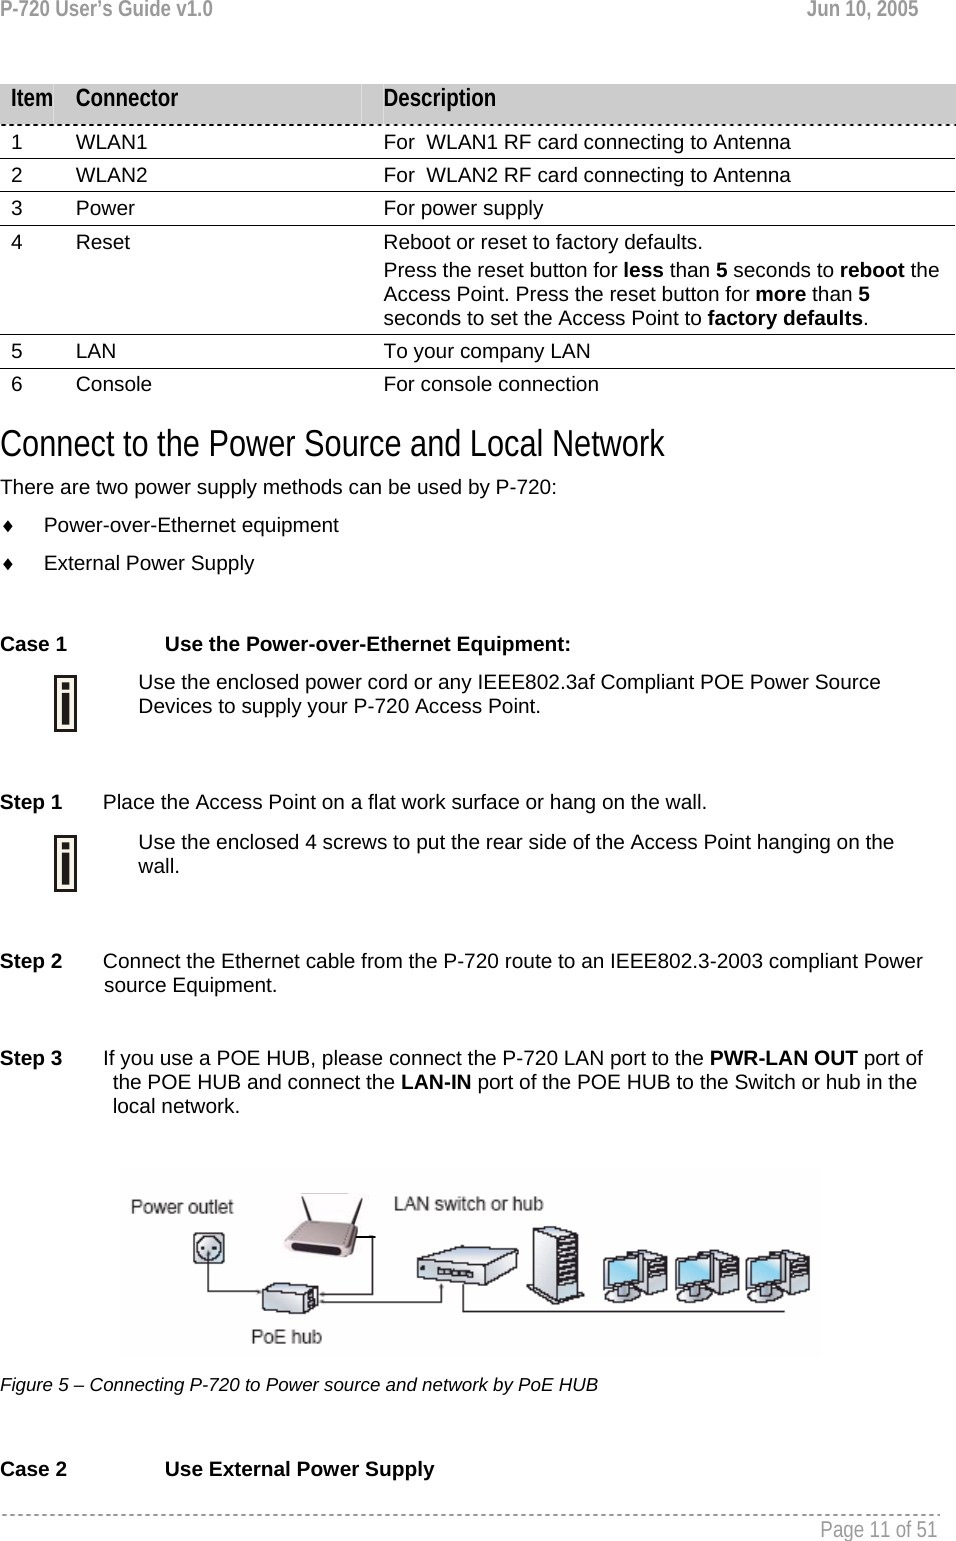 P-720 User’s Guide v1.0  Jun 10, 2005     Page 11 of 51   Connect to the Power Source and Local Network There are two power supply methods can be used by P-720: ♦ Power-over-Ethernet equipment ♦  External Power Supply  Case 1  Use the Power-over-Ethernet Equipment:  Use the enclosed power cord or any IEEE802.3af Compliant POE Power Source Devices to supply your P-720 Access Point.  Step 1       Place the Access Point on a flat work surface or hang on the wall.  Use the enclosed 4 screws to put the rear side of the Access Point hanging on the wall.  Step 2       Connect the Ethernet cable from the P-720 route to an IEEE802.3-2003 compliant Power source Equipment.  Step 3       If you use a POE HUB, please connect the P-720 LAN port to the PWR-LAN OUT port of the POE HUB and connect the LAN-IN port of the POE HUB to the Switch or hub in the local network.     Figure 5 – Connecting P-720 to Power source and network by PoE HUB  Case 2  Use External Power Supply Item  Connector  Description 1  WLAN1  For  WLAN1 RF card connecting to Antenna  2  WLAN2  For  WLAN2 RF card connecting to Antenna 3  Power  For power supply 4  Reset  Reboot or reset to factory defaults. Press the reset button for less than 5 seconds to reboot the Access Point. Press the reset button for more than 5 seconds to set the Access Point to factory defaults. 5  LAN  To your company LAN 6 Console  For console connection 